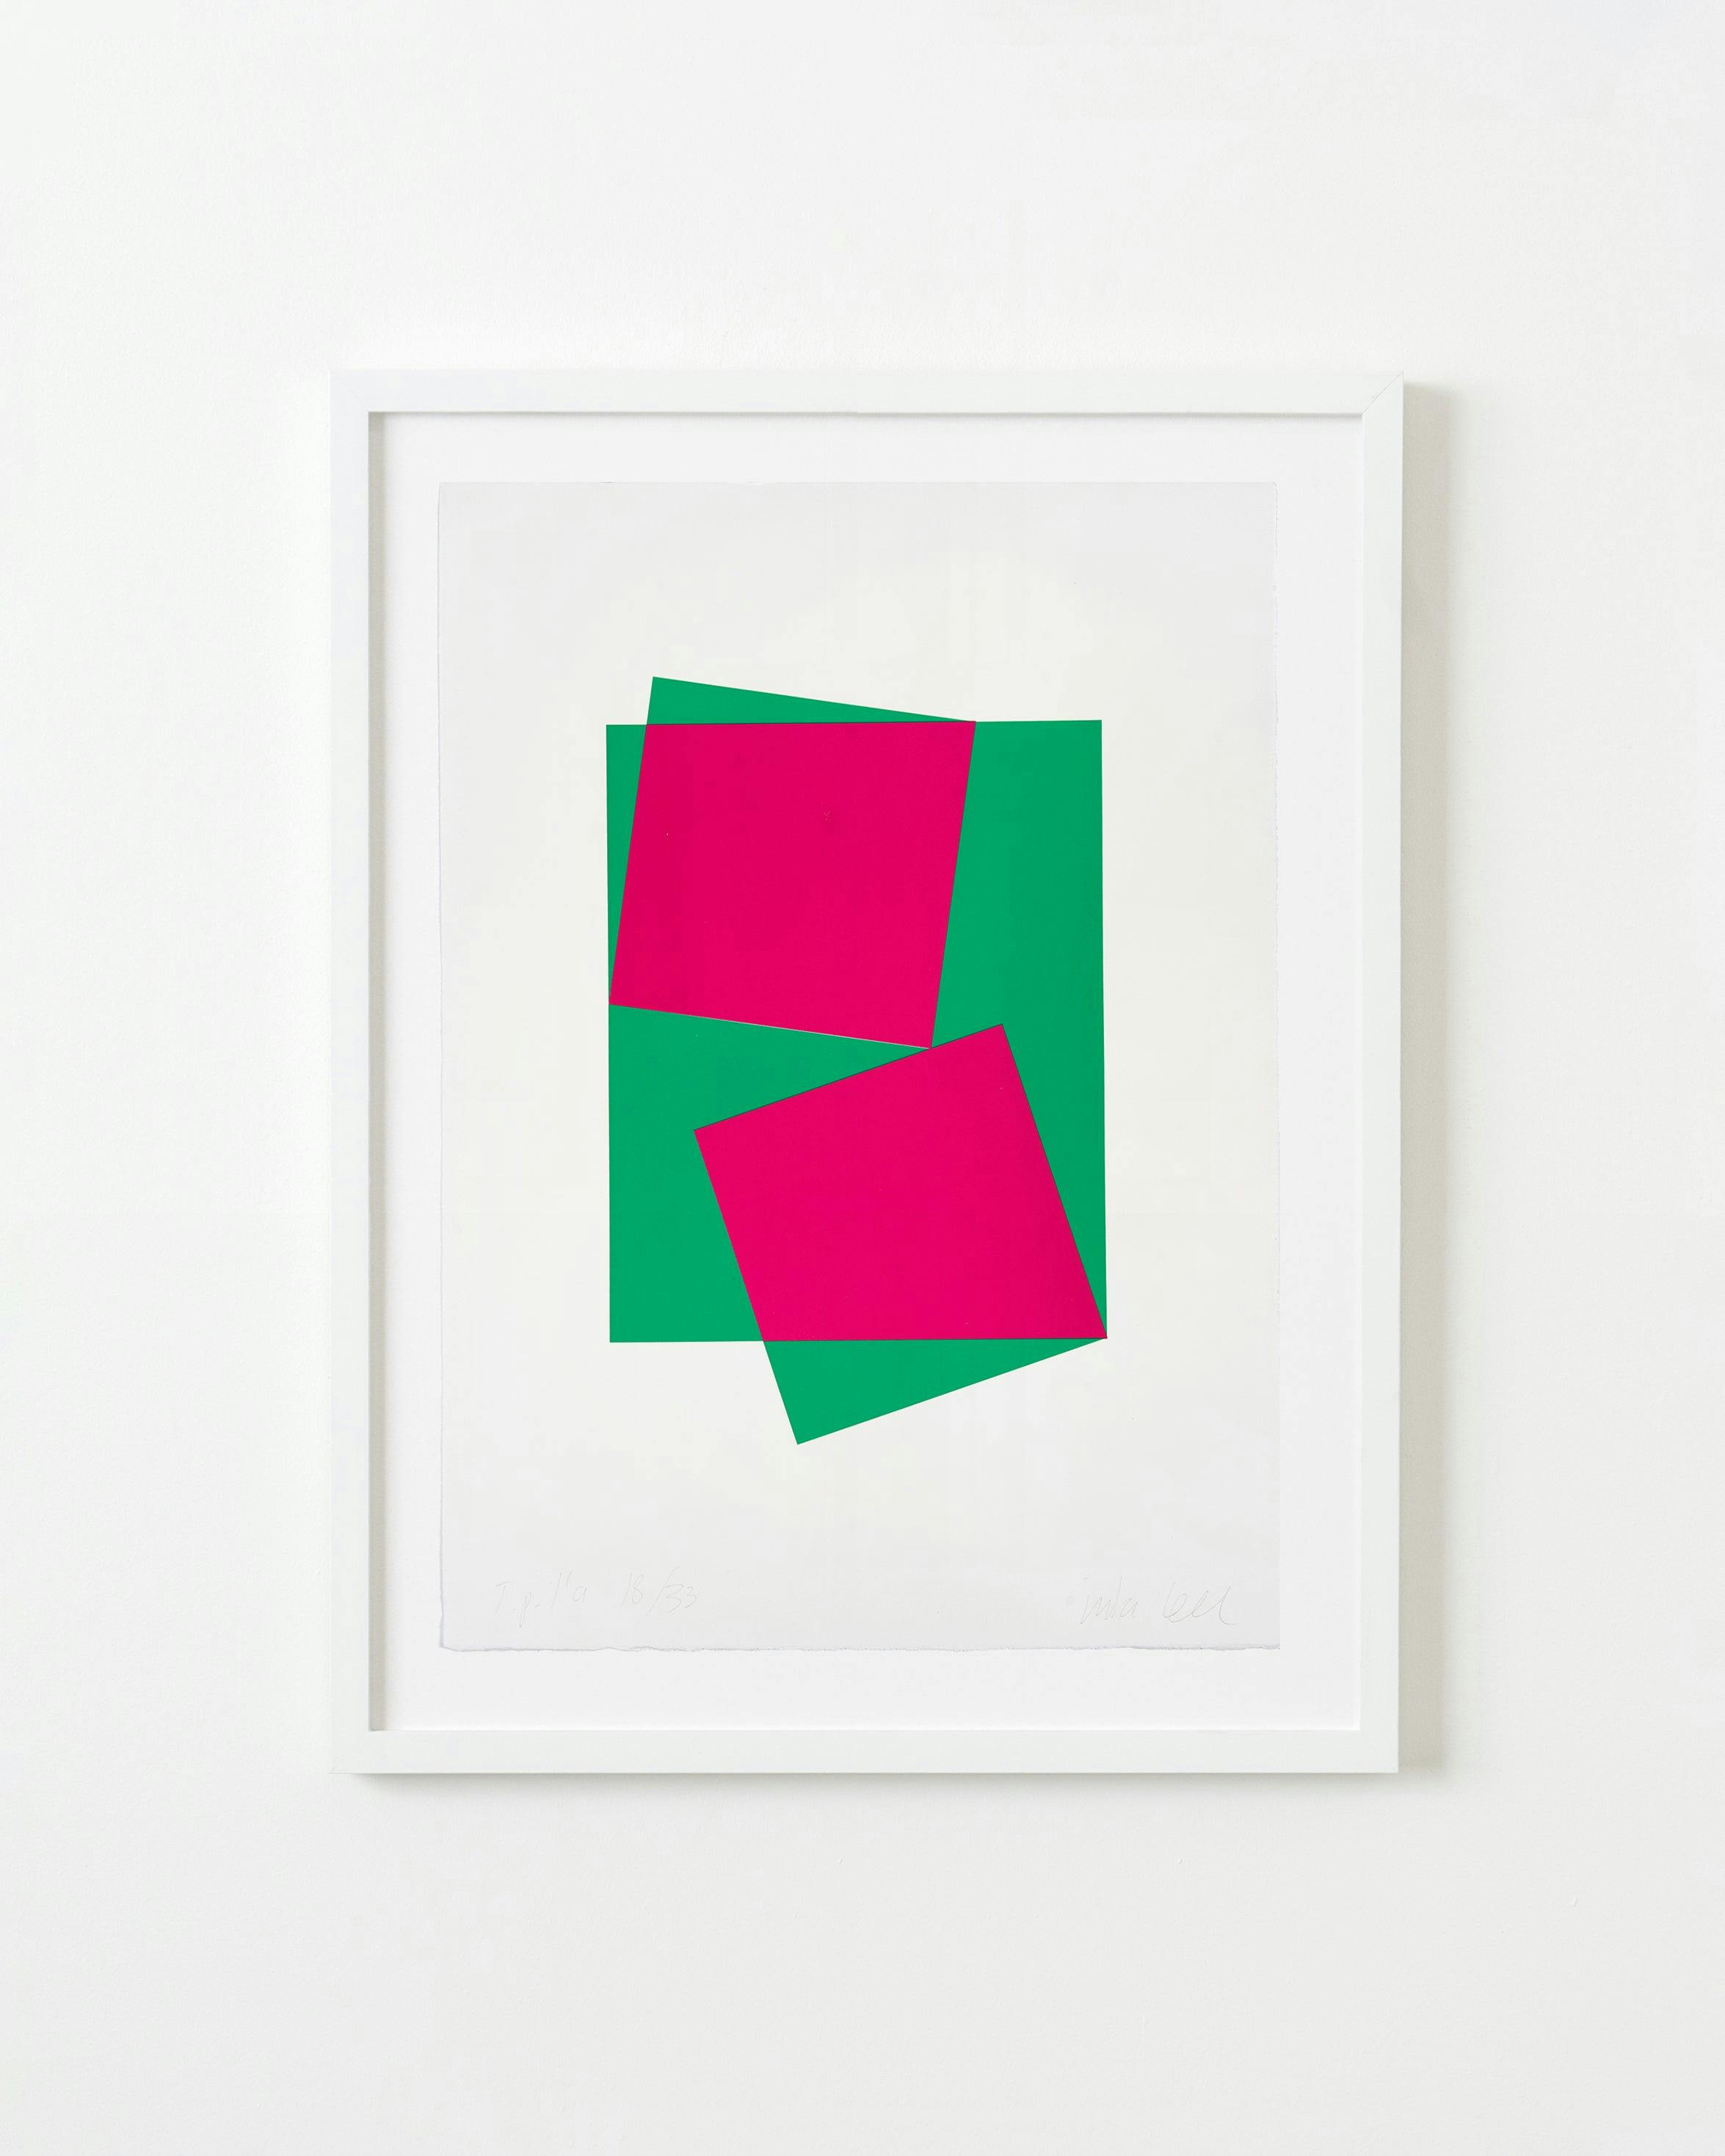 Print by Inka Bell titled "Squares".